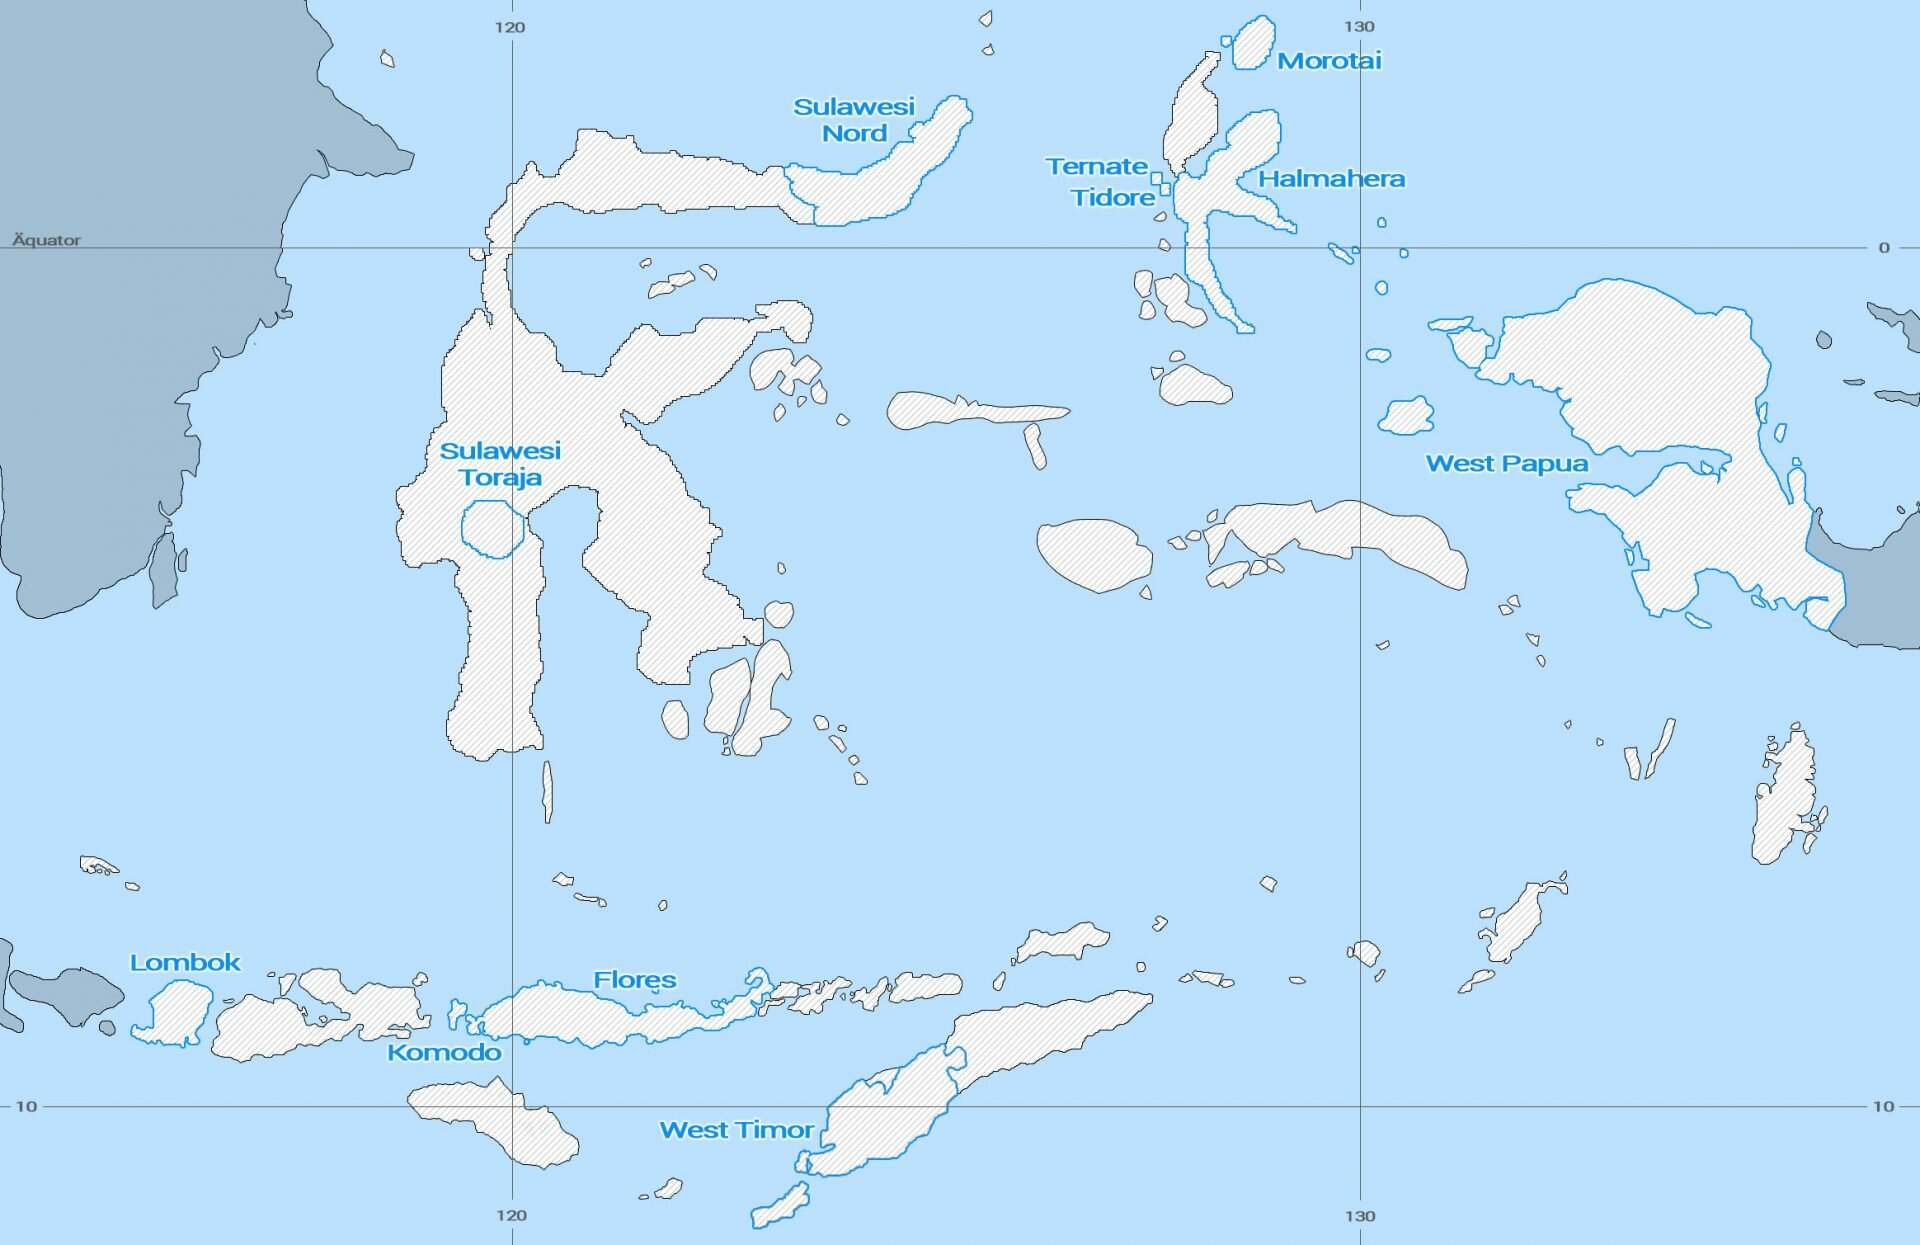 Map Region 'East of Wallace': Sulawesi, Moluccas, Sunda and West Papua